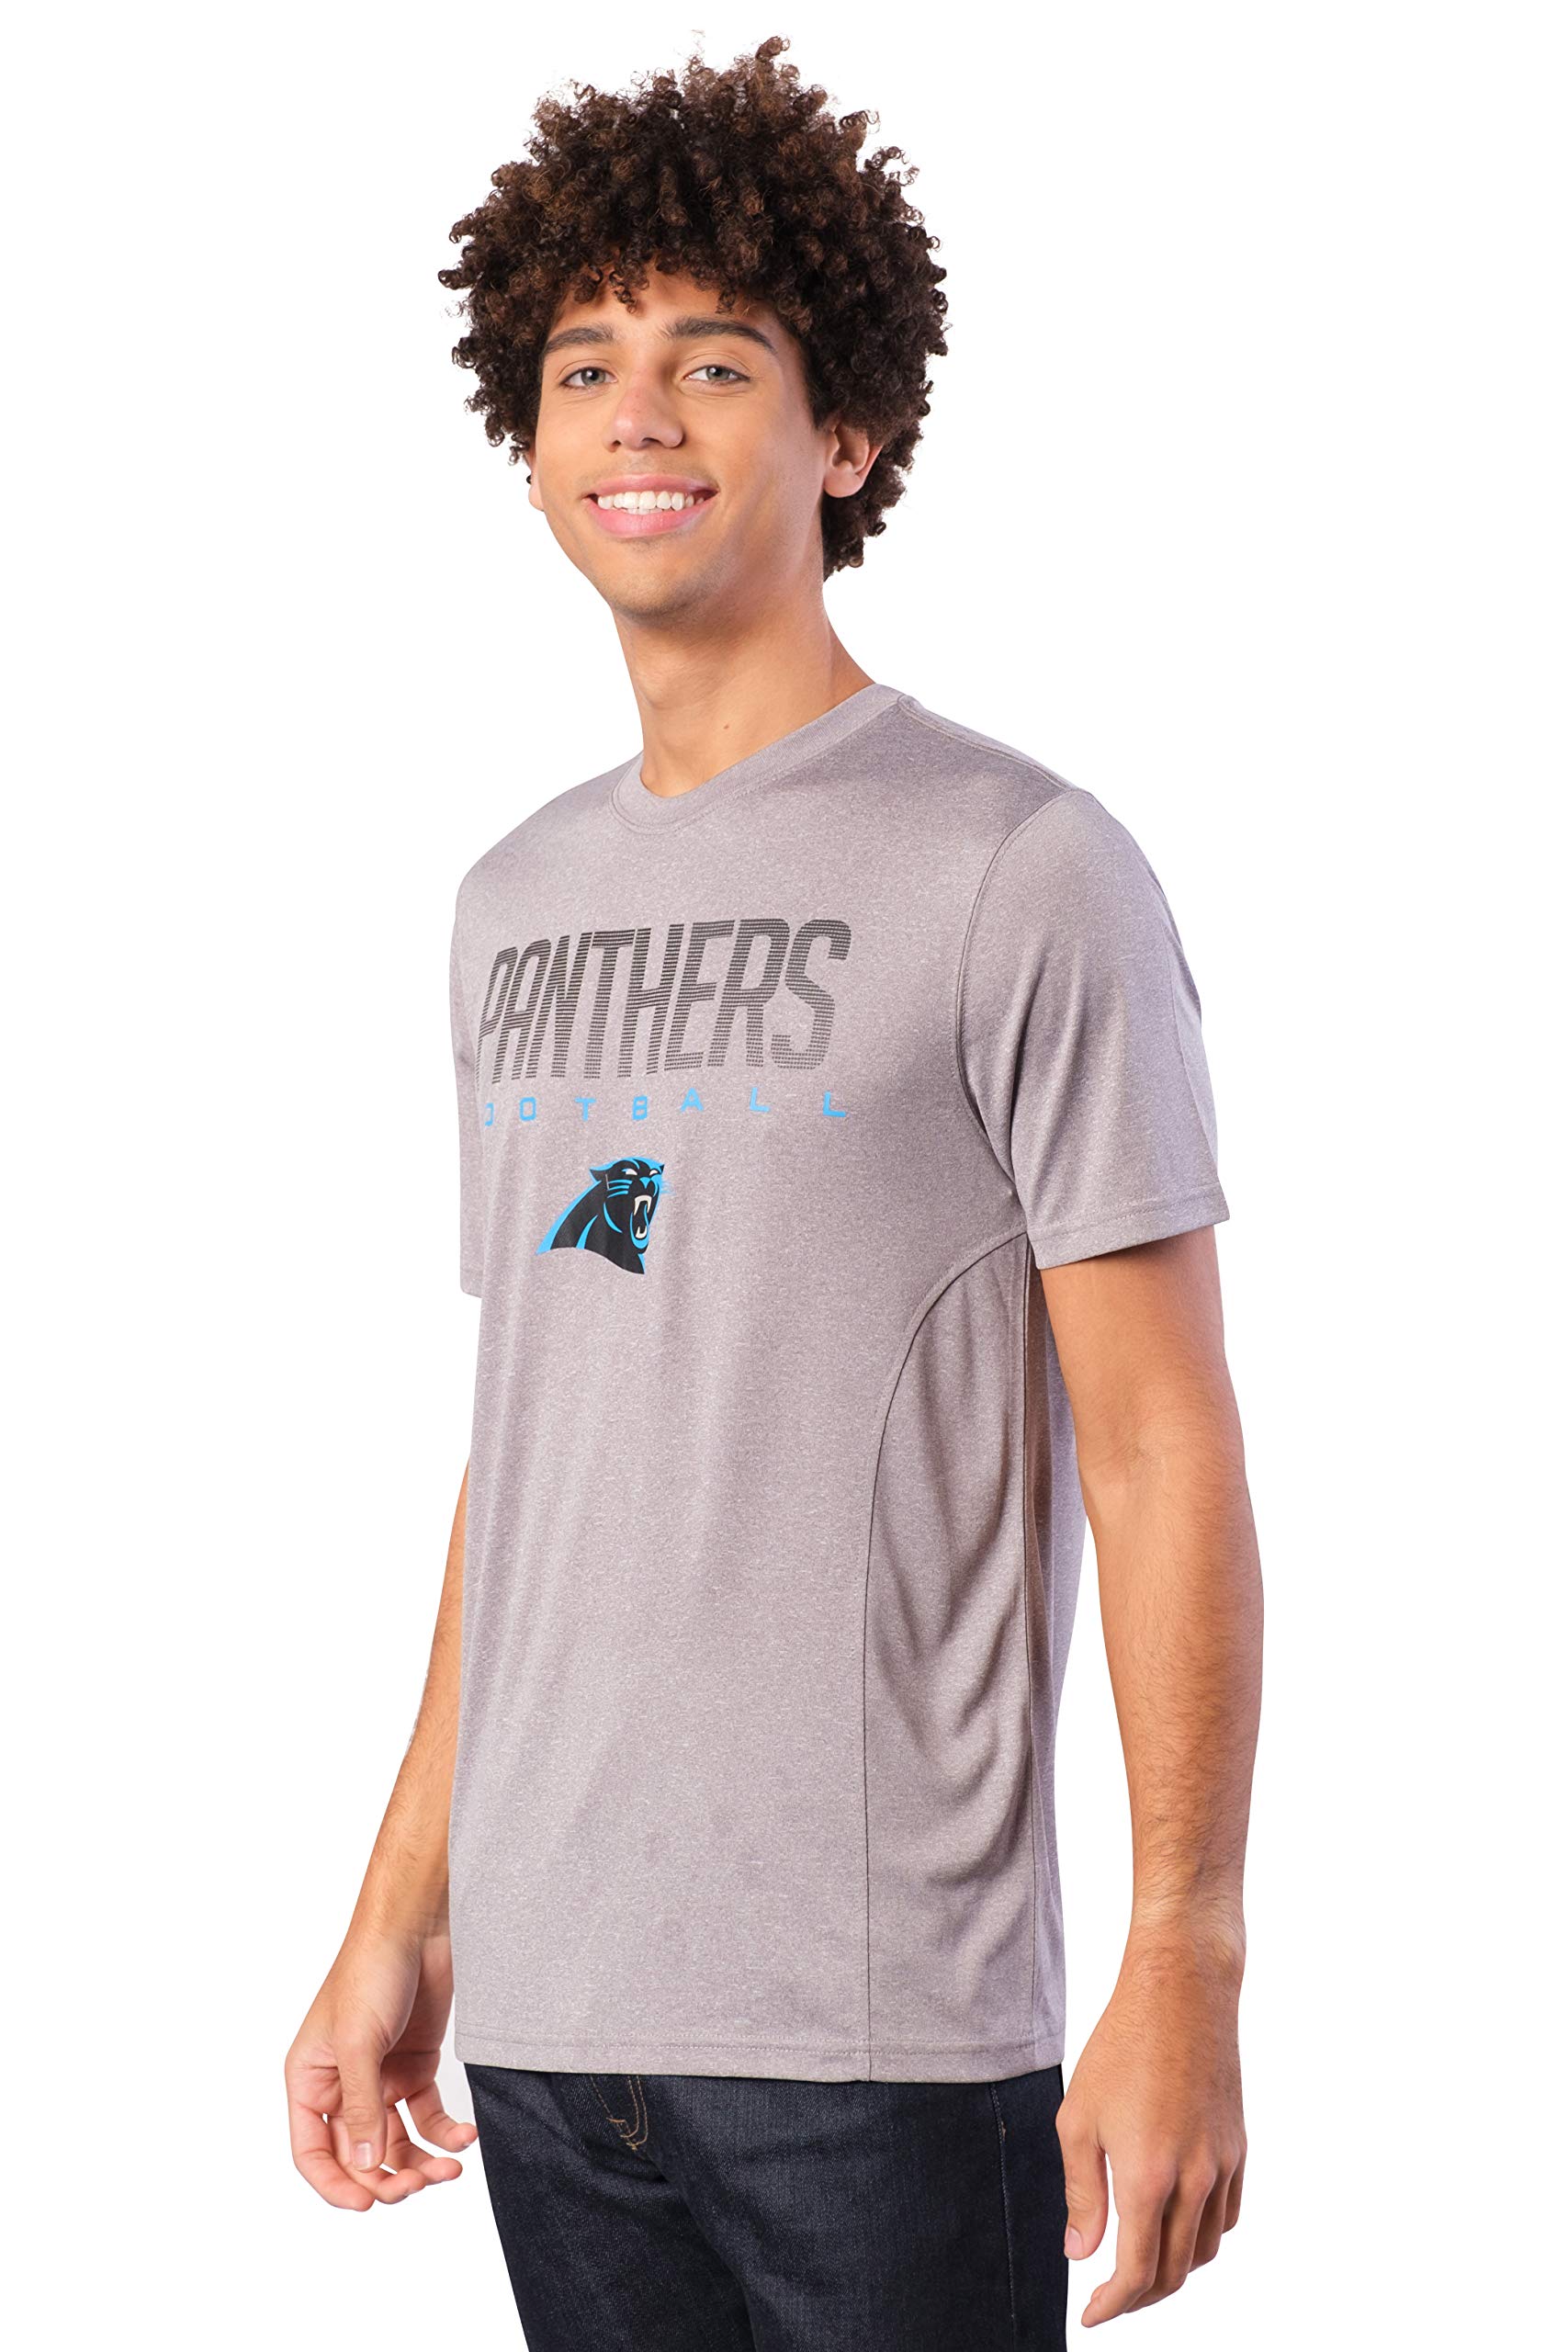 Ultra Game NFL Men's Moisture Wicking Athletic Performance Active T-Shirt